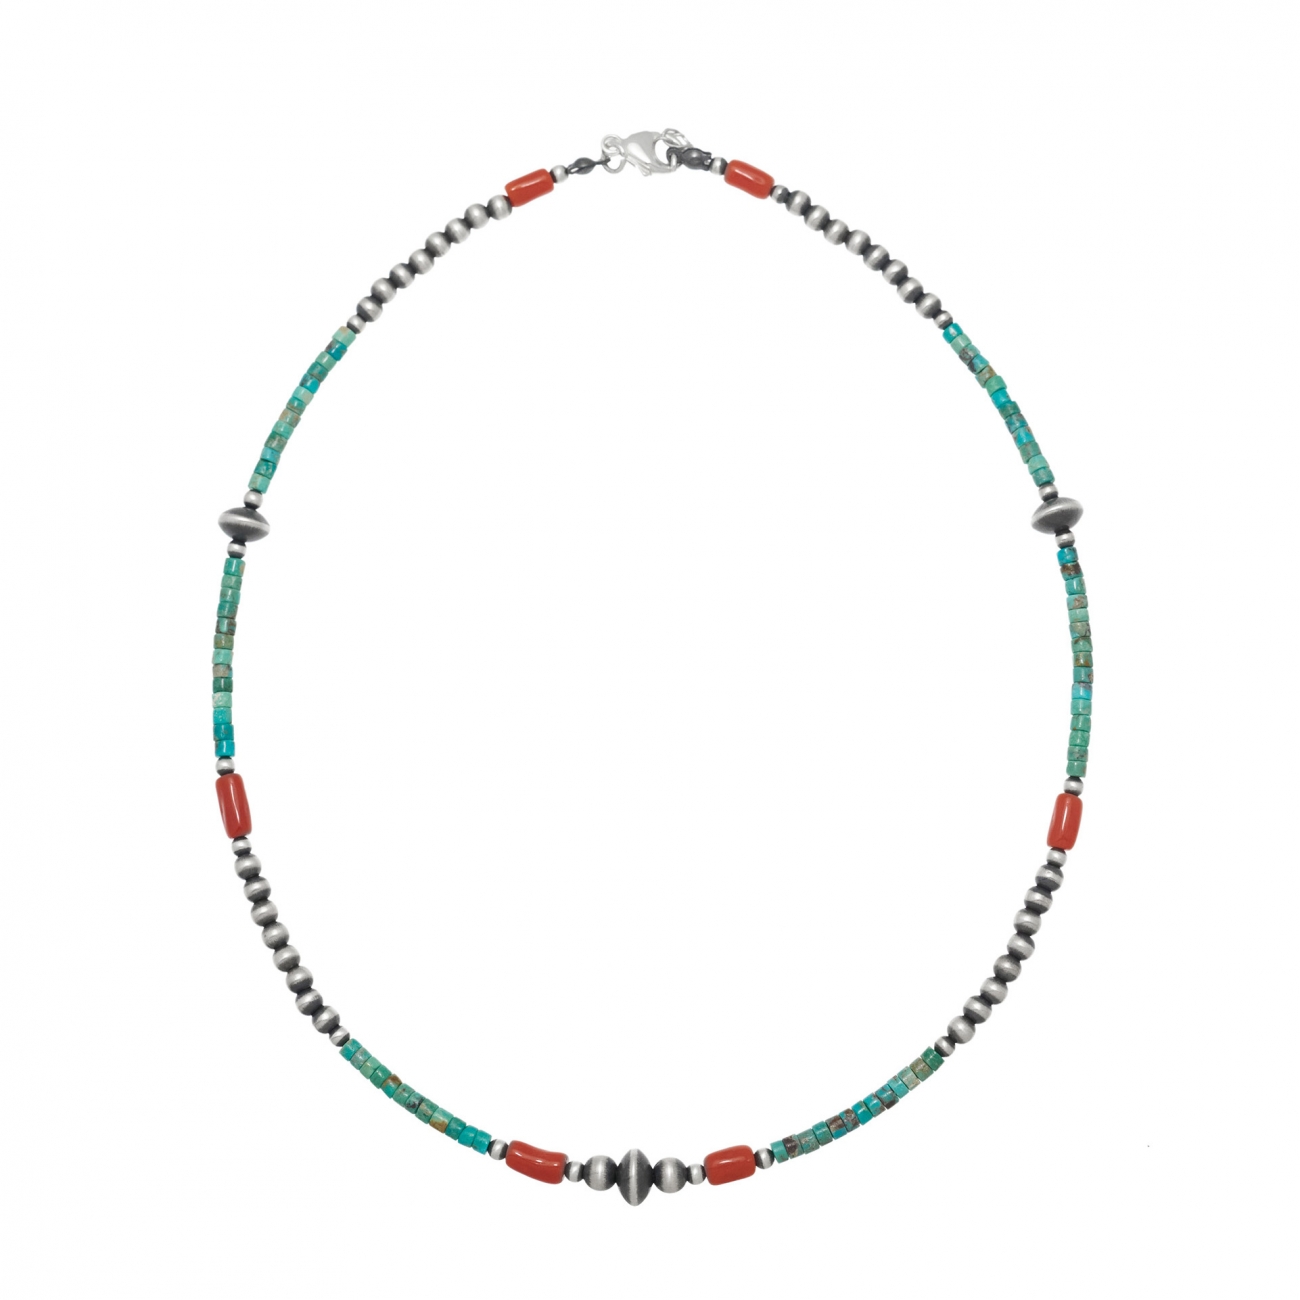 Harpo Paris necklace CO176 turquoise heishi beads and silver